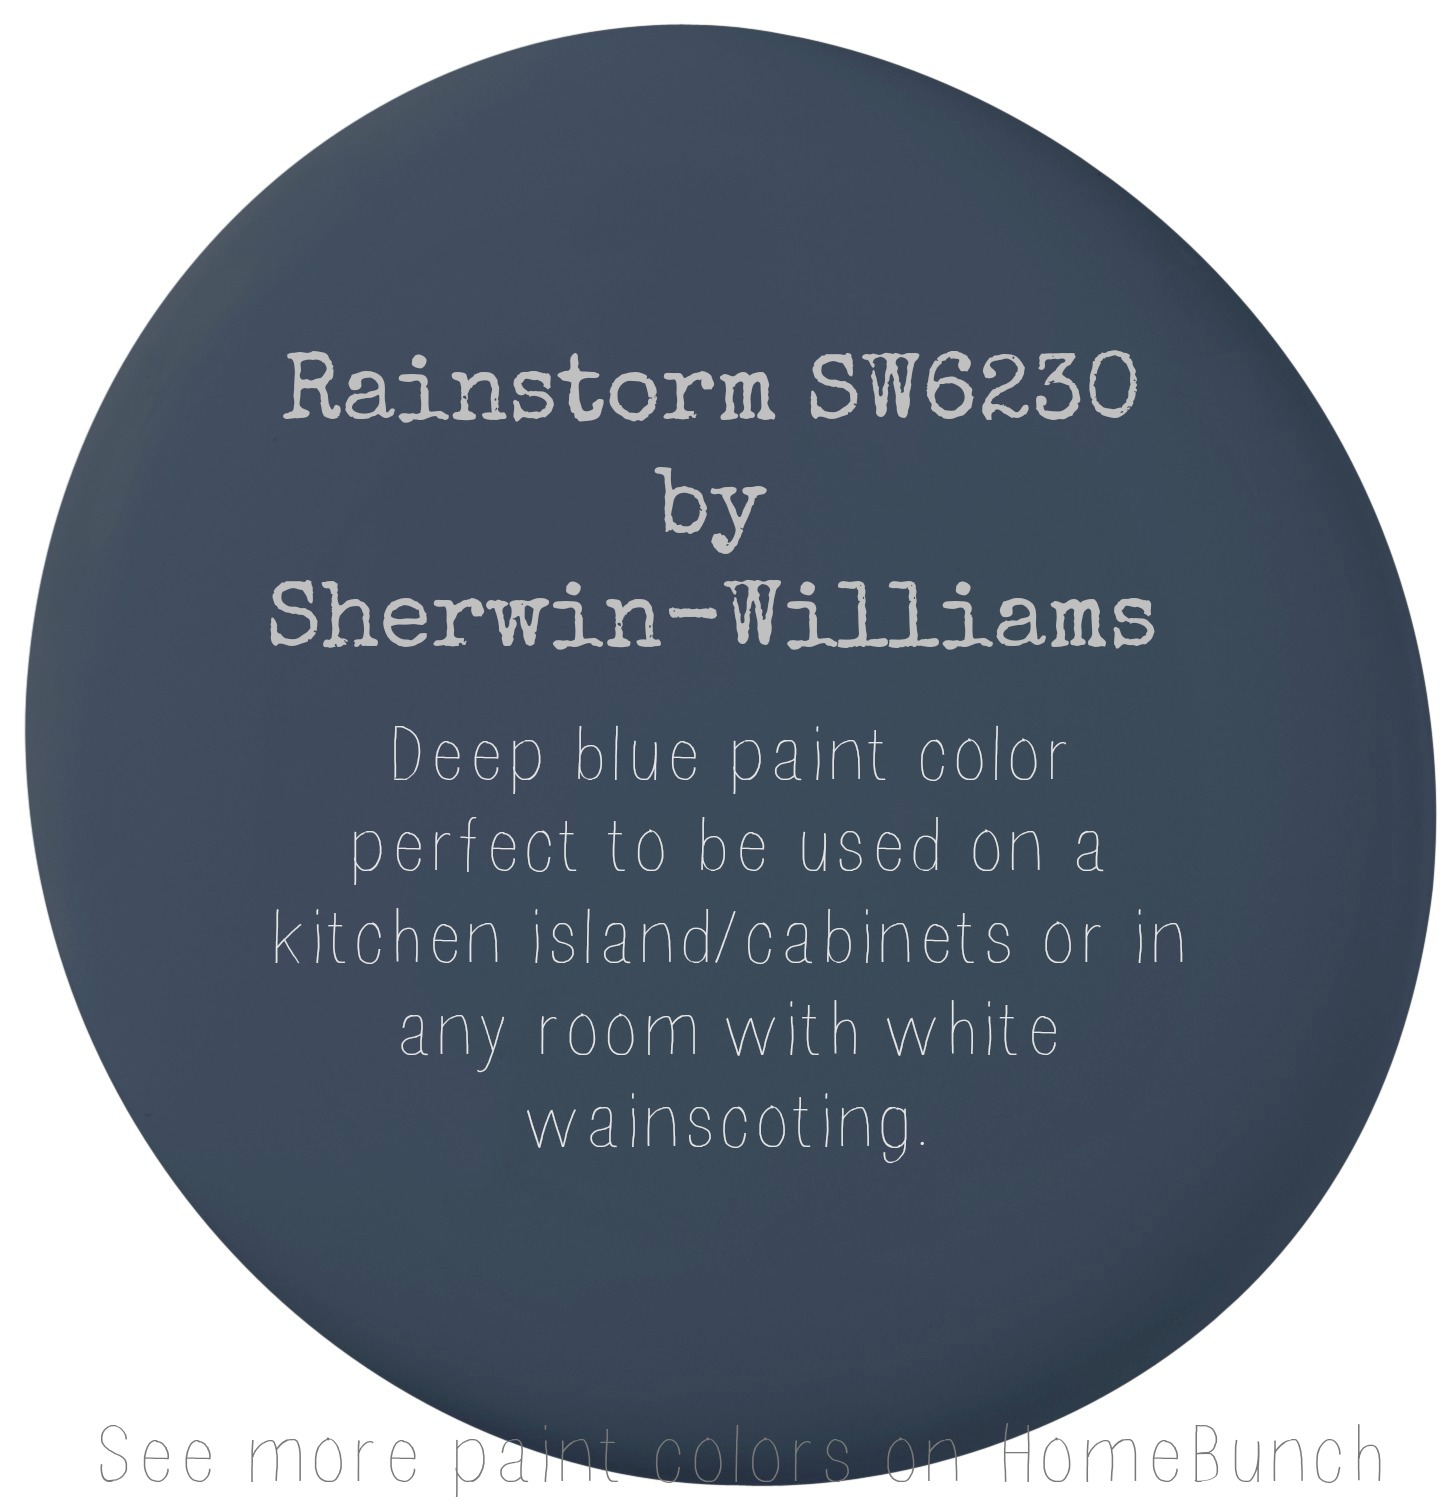 Rainstorm SW6230 by Sherwin Williams. Deep blue paint color perfect to be used on a kitchen island, cabinets or in any room with white wainscoting. #Rainstorm #SW6230 #SherwinWilliam Via Home Bunch.